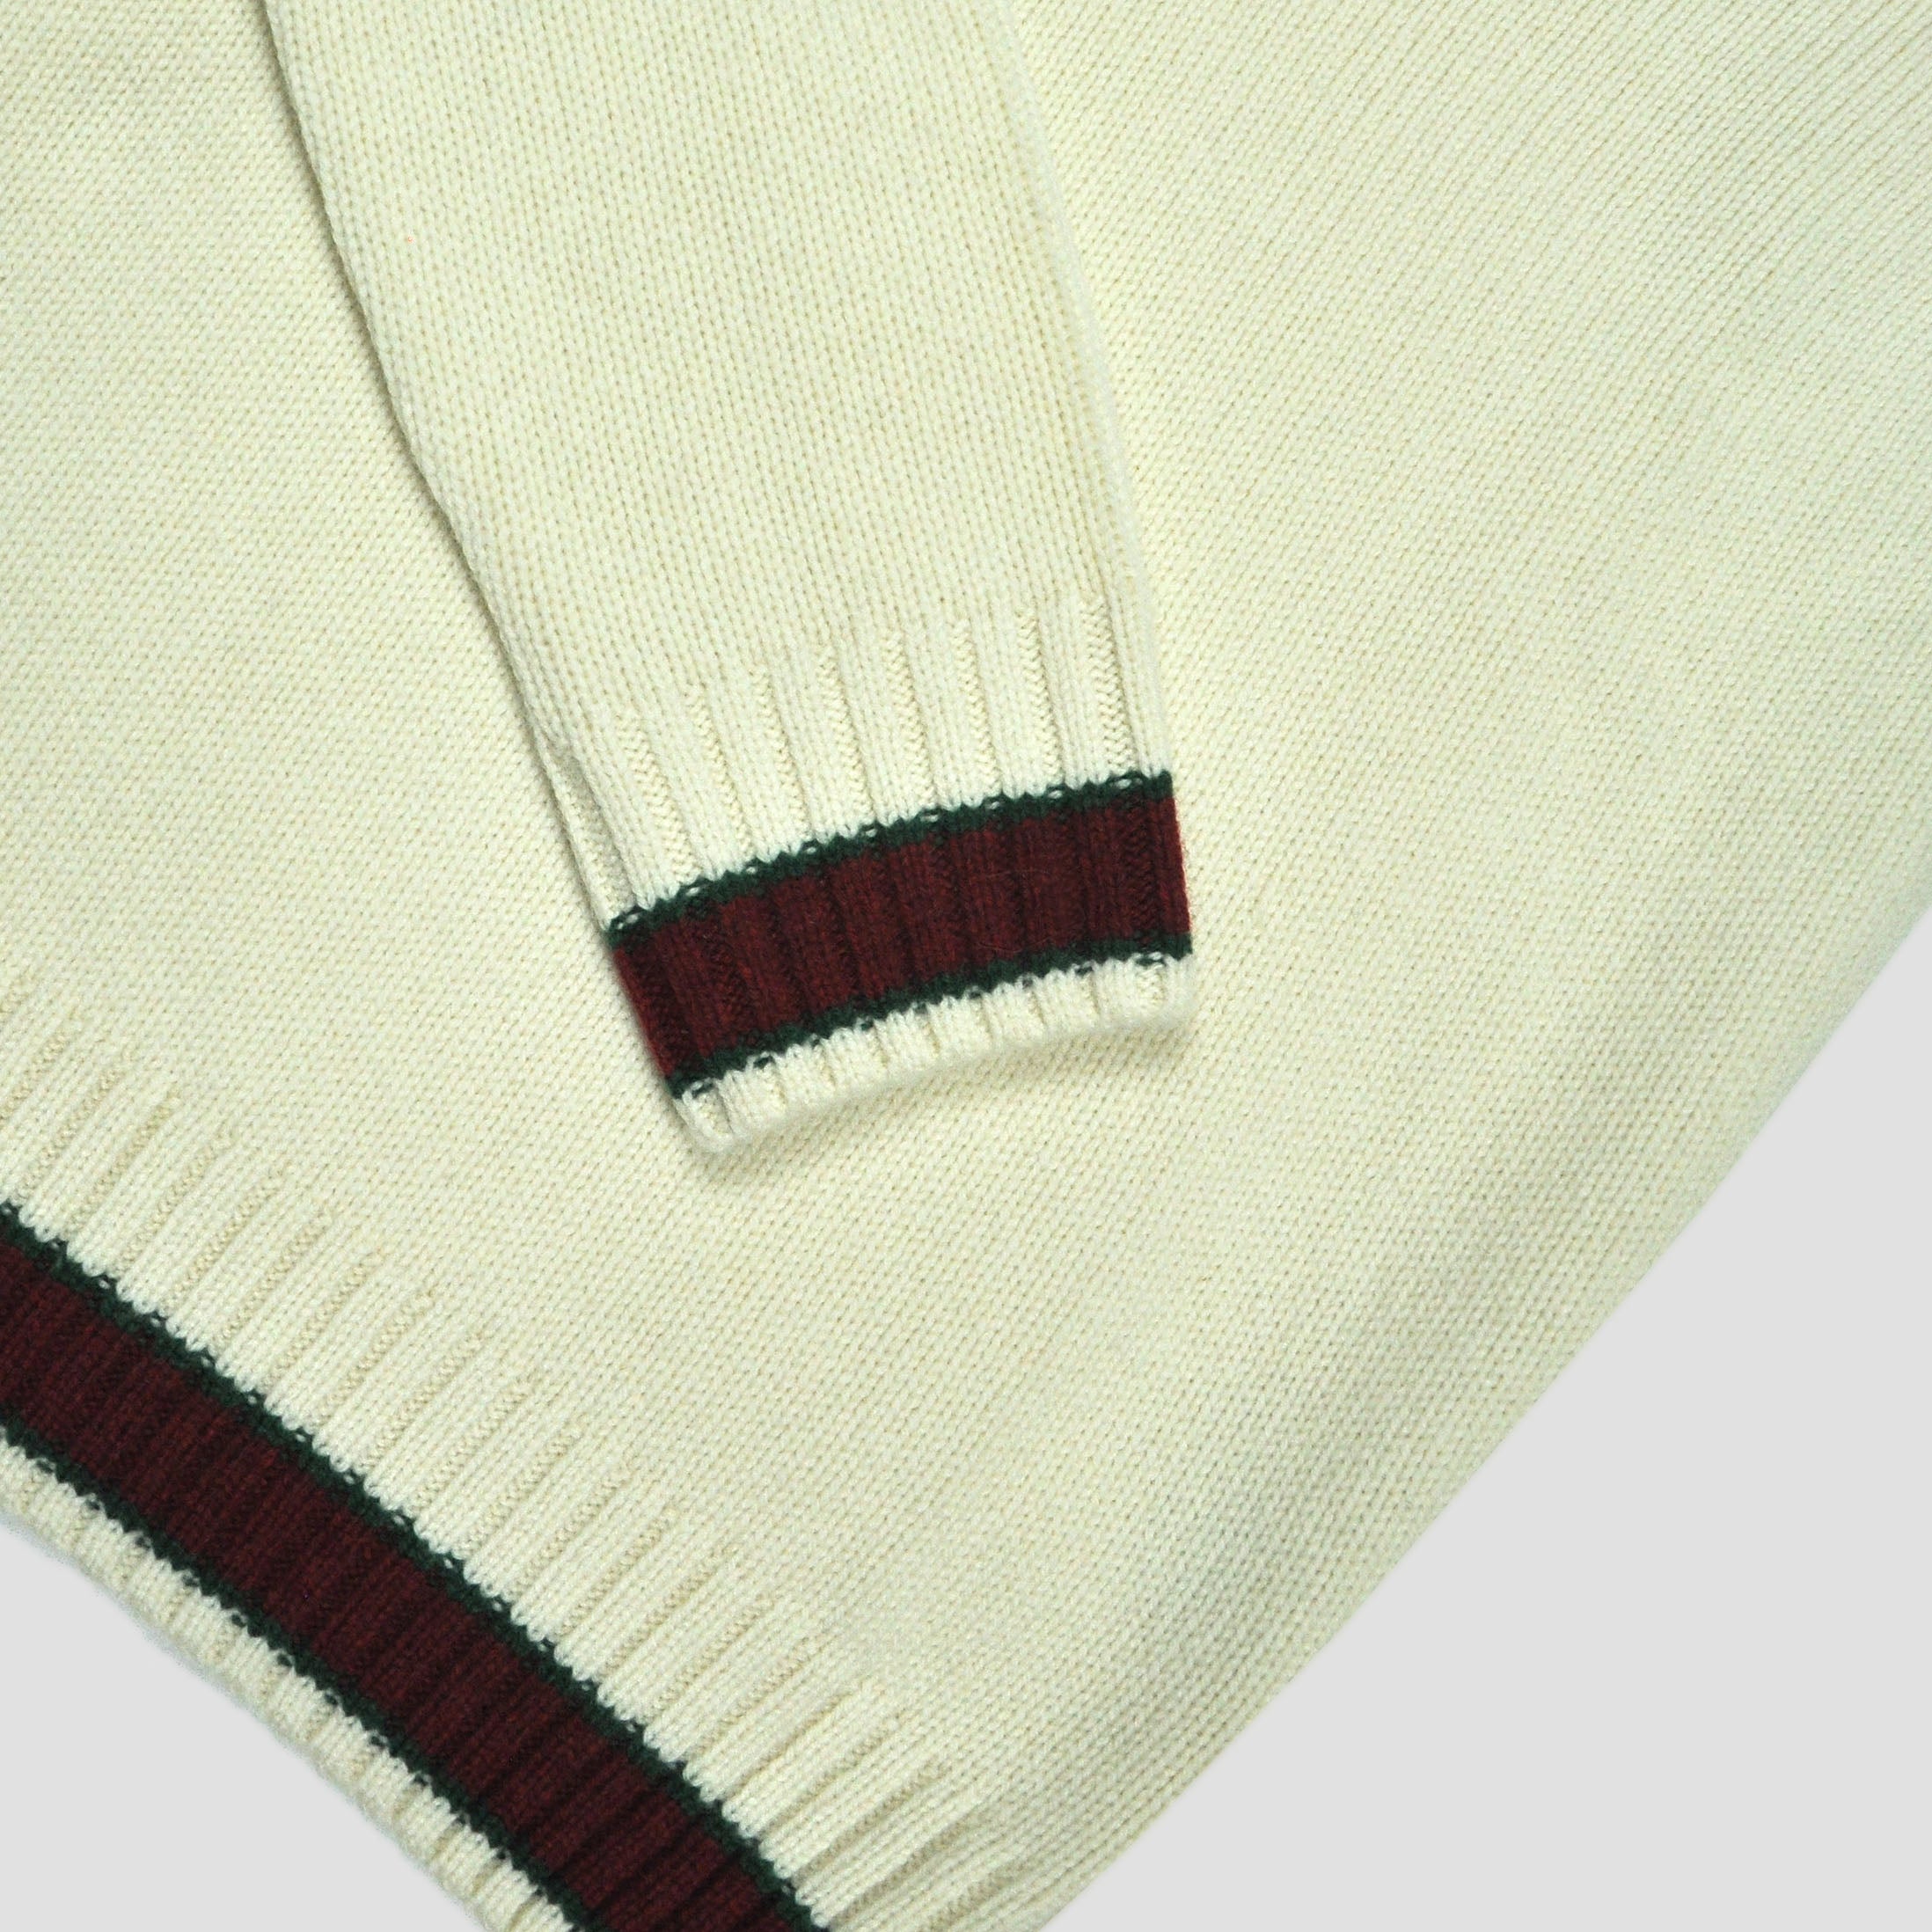 Merino Wool V-Neck Cricket Style Jumper in White with Green & Red Trim